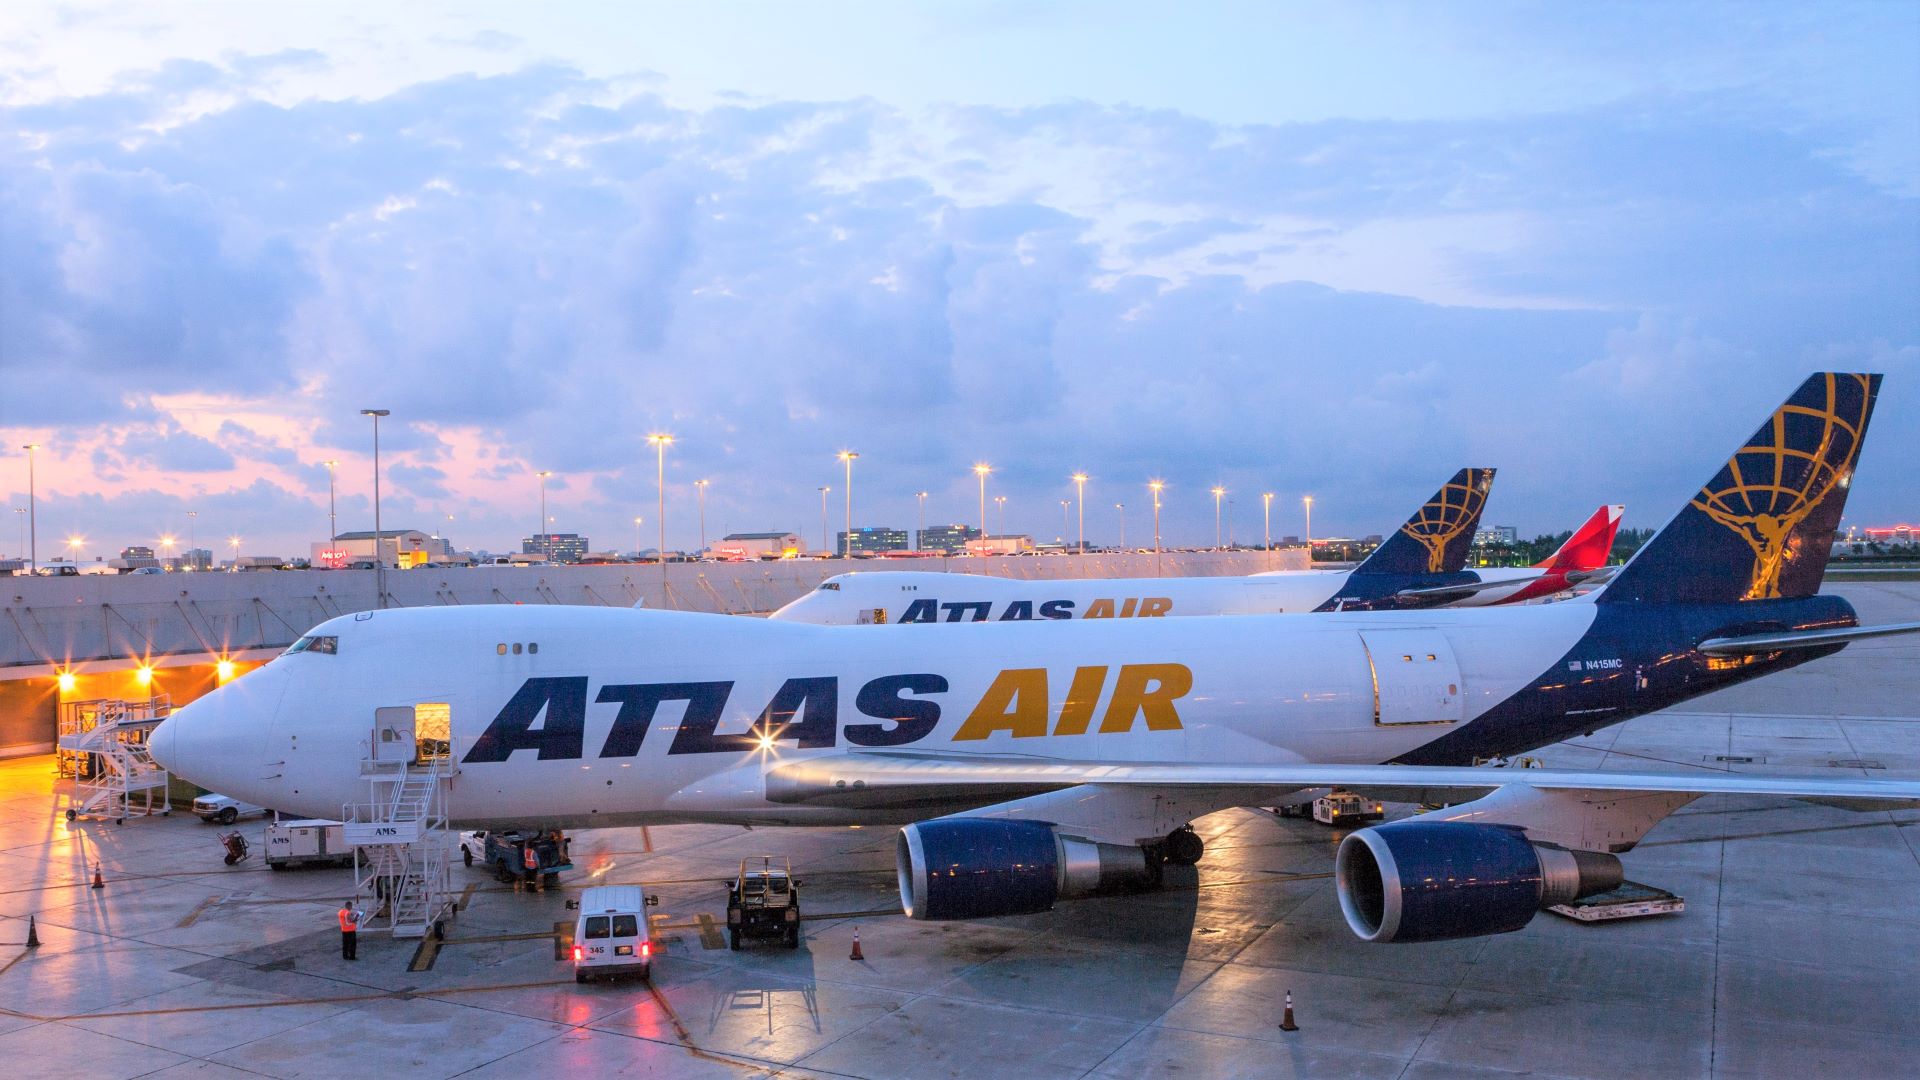 Atlas Air jumbo jets with blue and gold lettering sit on tarmac at dawn.